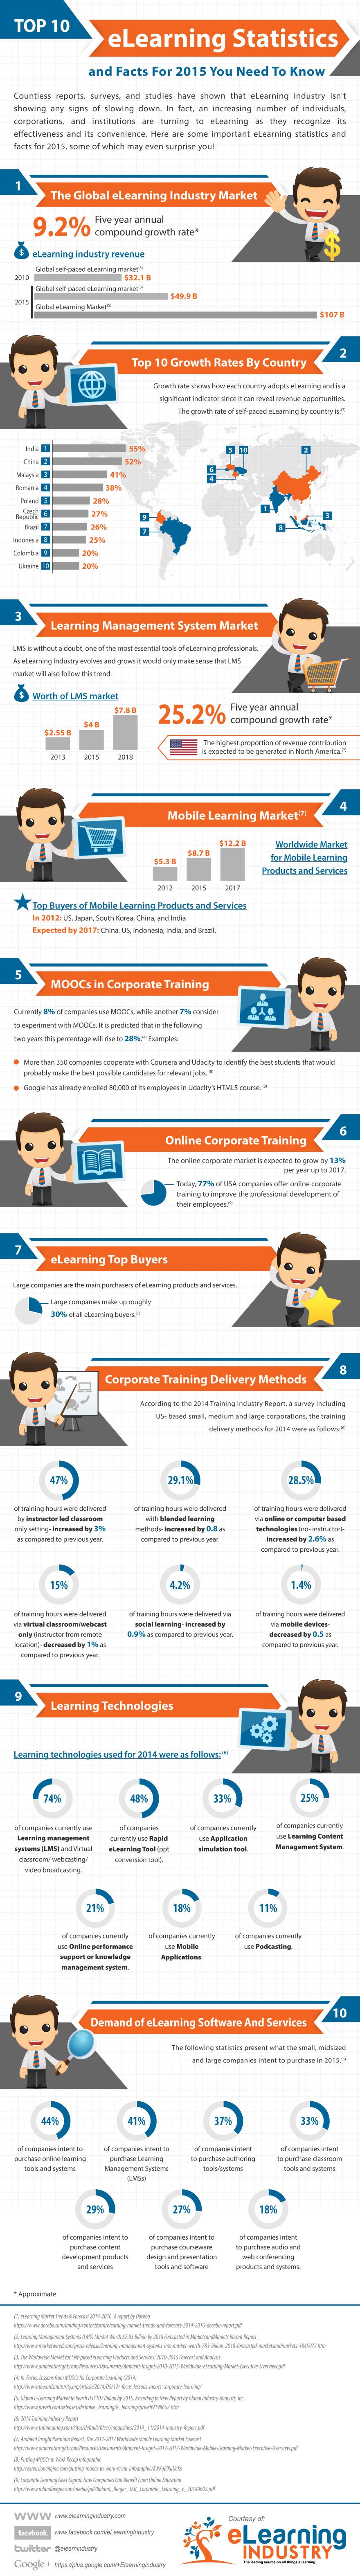 Top eLearning Stats and Facts For 2015 Infographic